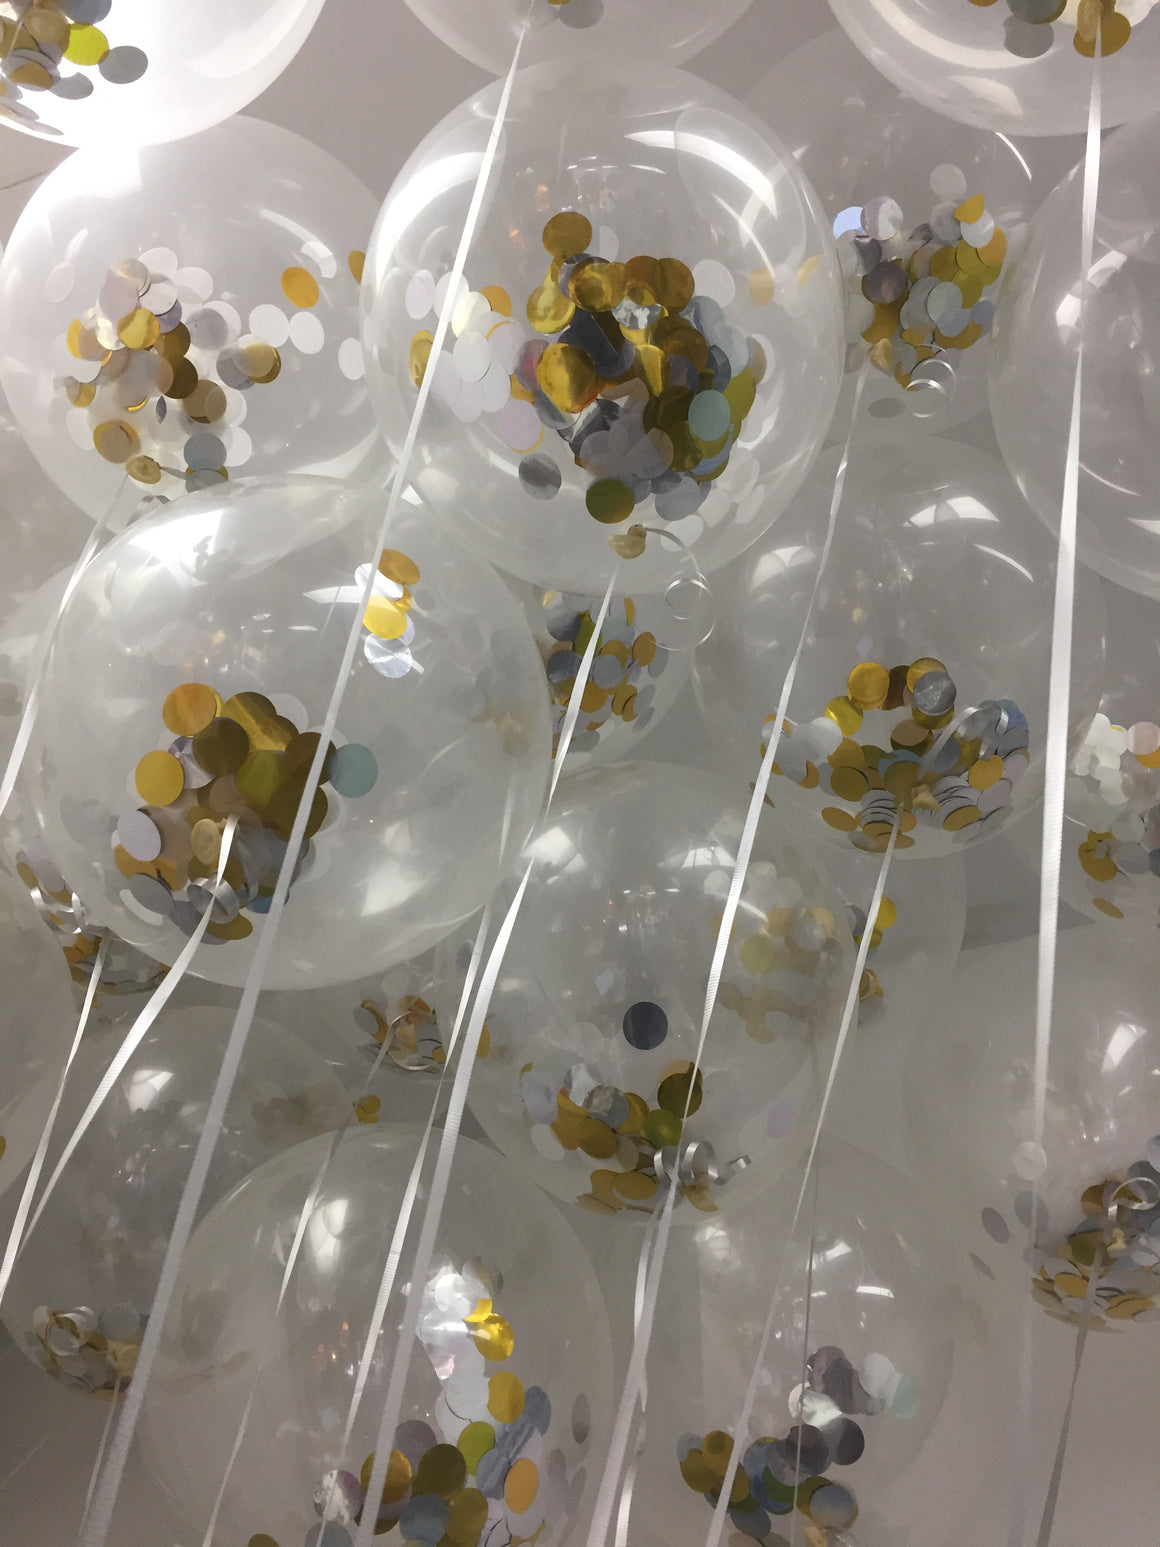 Confetti balloons (10 balloons) - LIMITED FLOAT TIME. order for Day of event